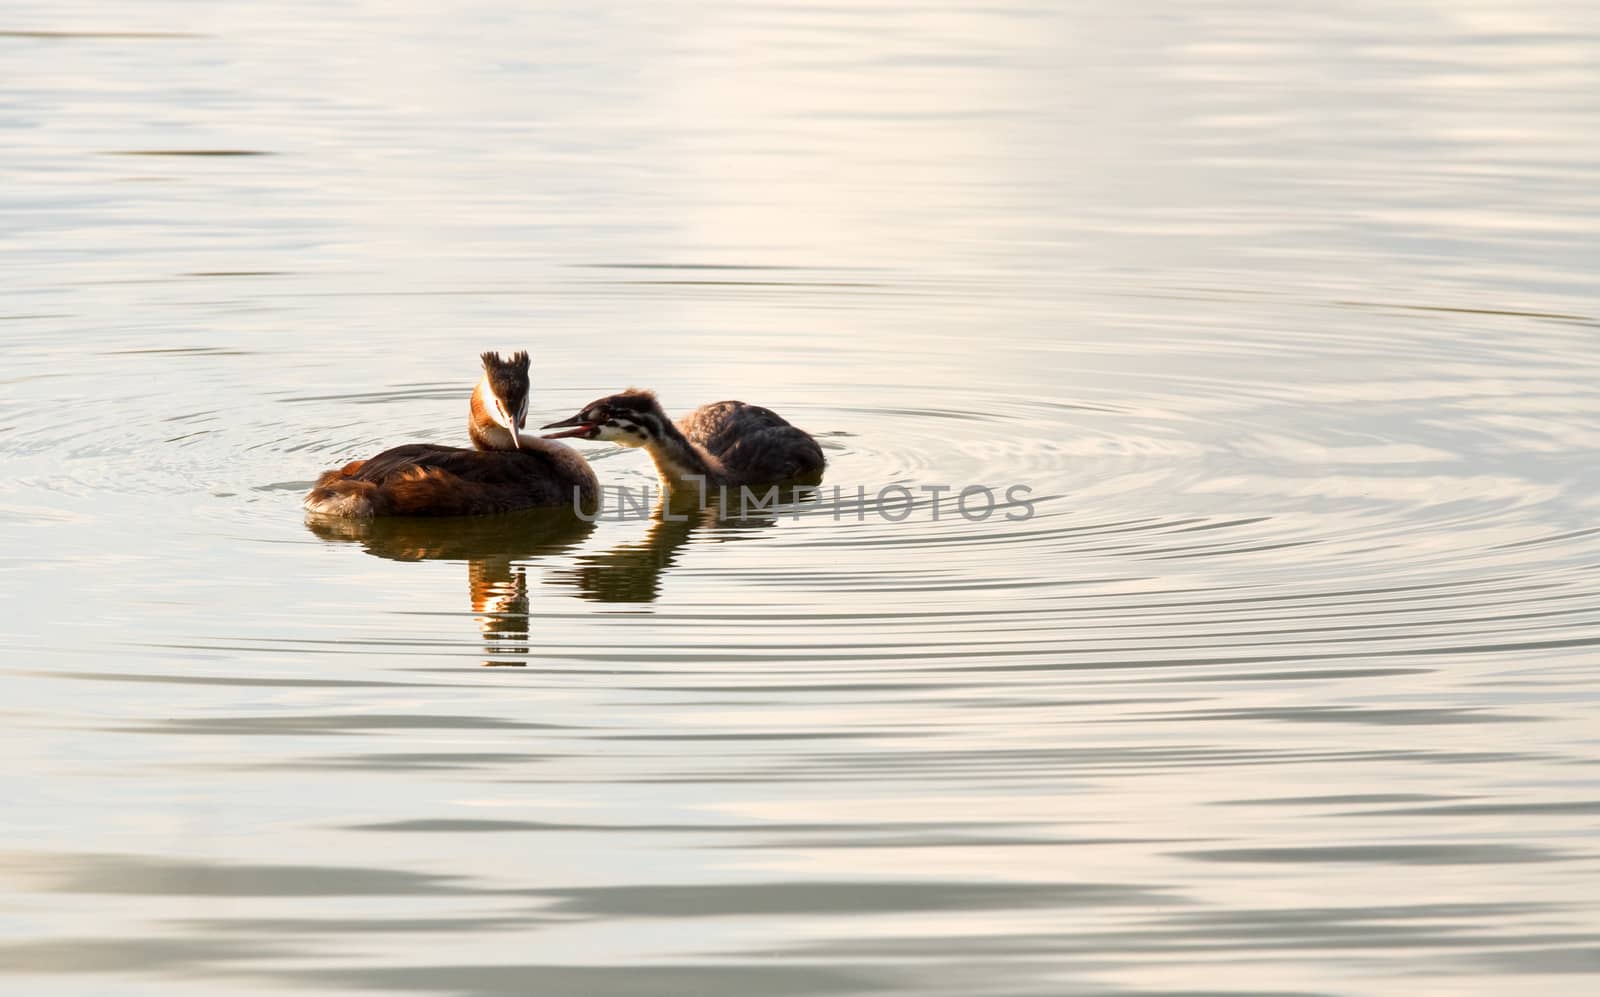 Female Great Crested Grebe ignoring young adult begging for food in evening light on the lake